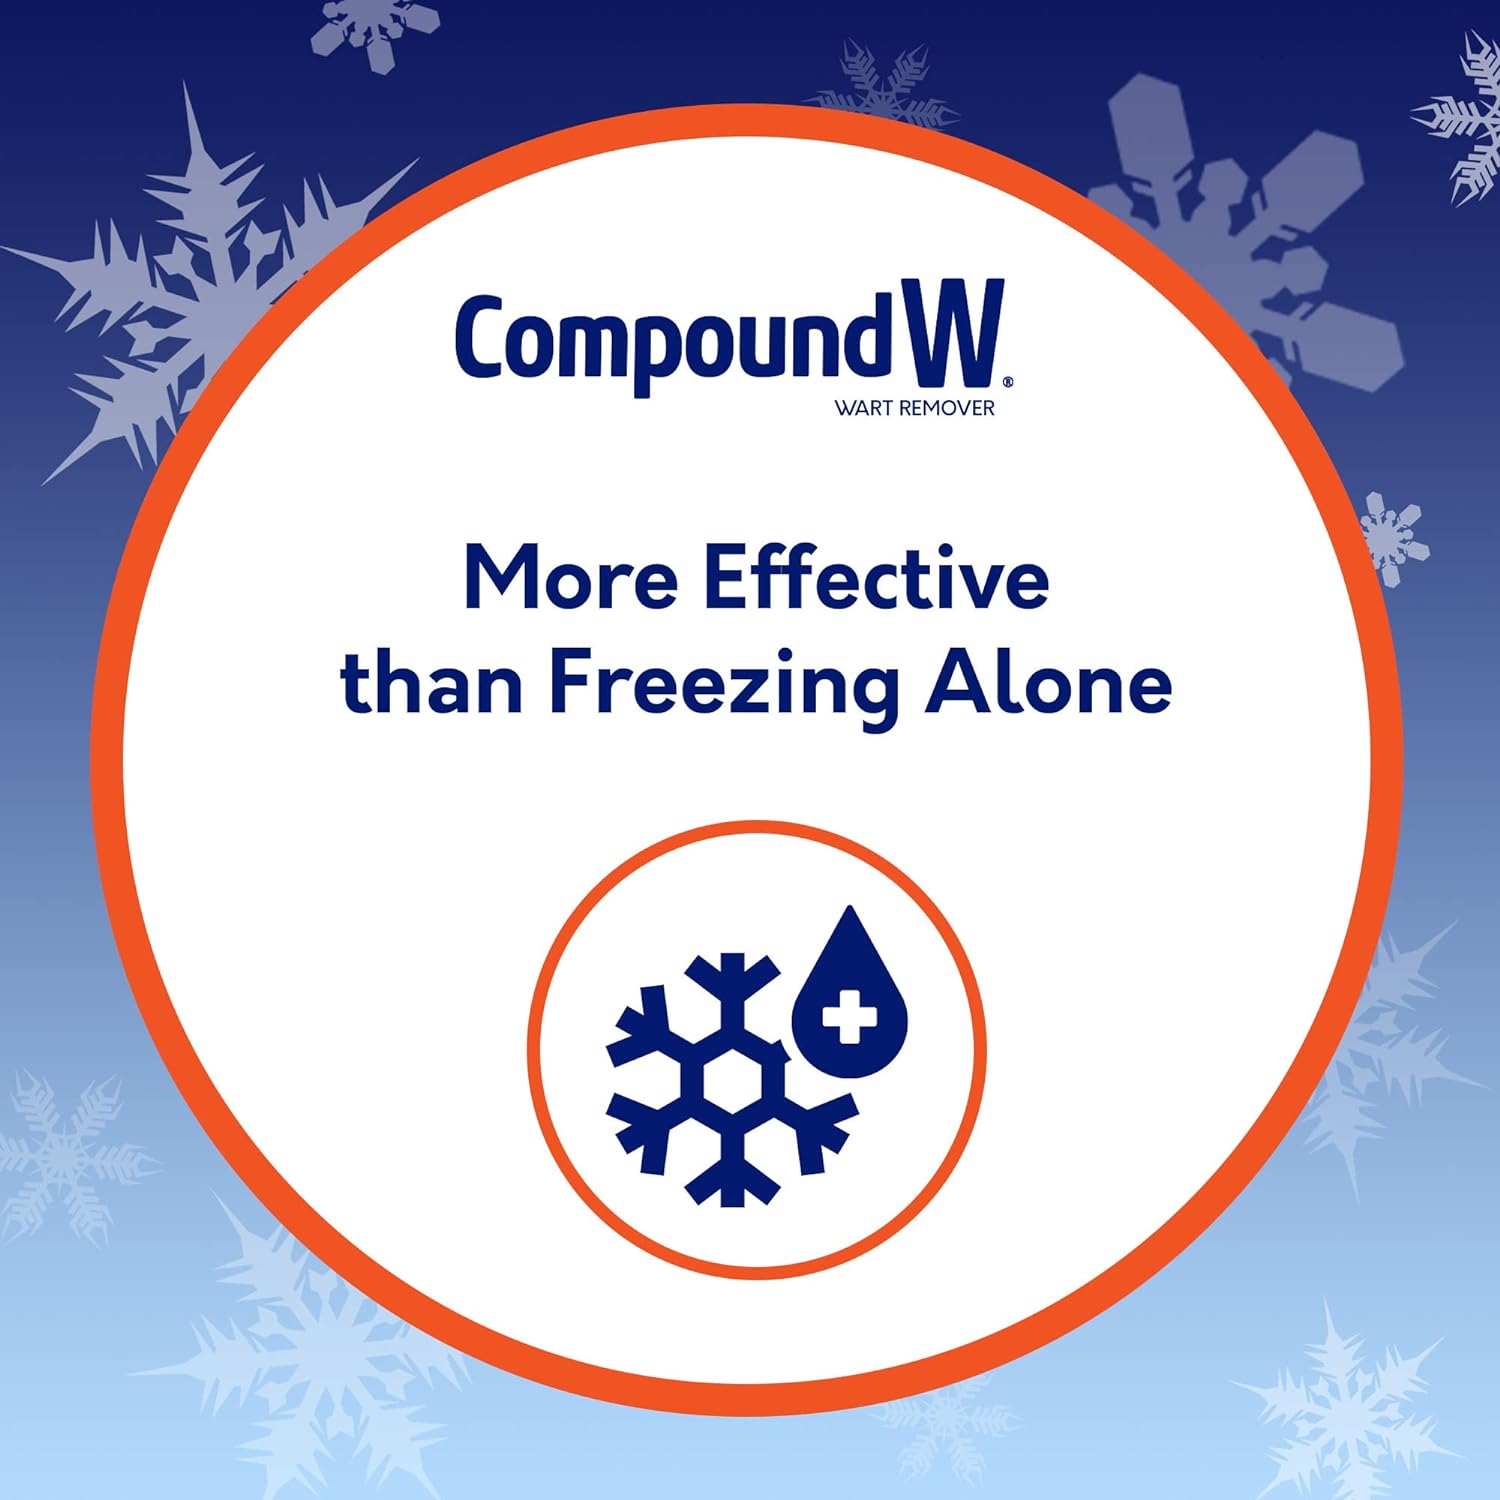 Compound W Dual Power for Large Warts, Freeze Off & Liquid Wart Remover, 8 Freeze Applications and 12 Comfort Pads